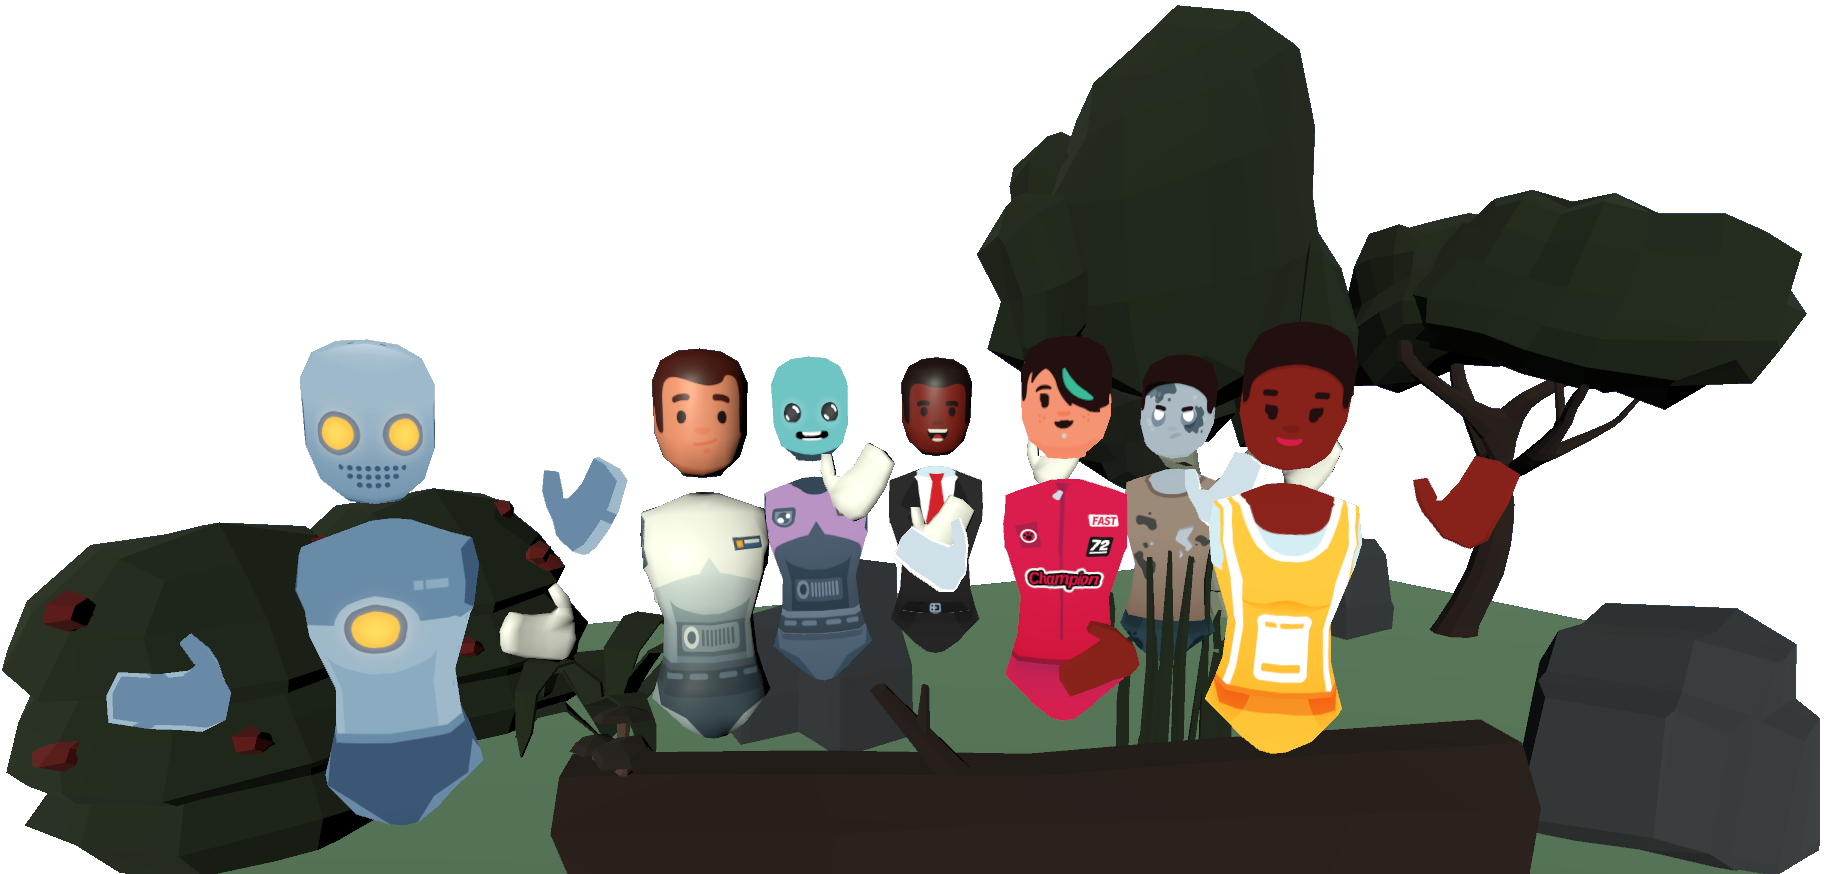 Picture of Avatars Waving